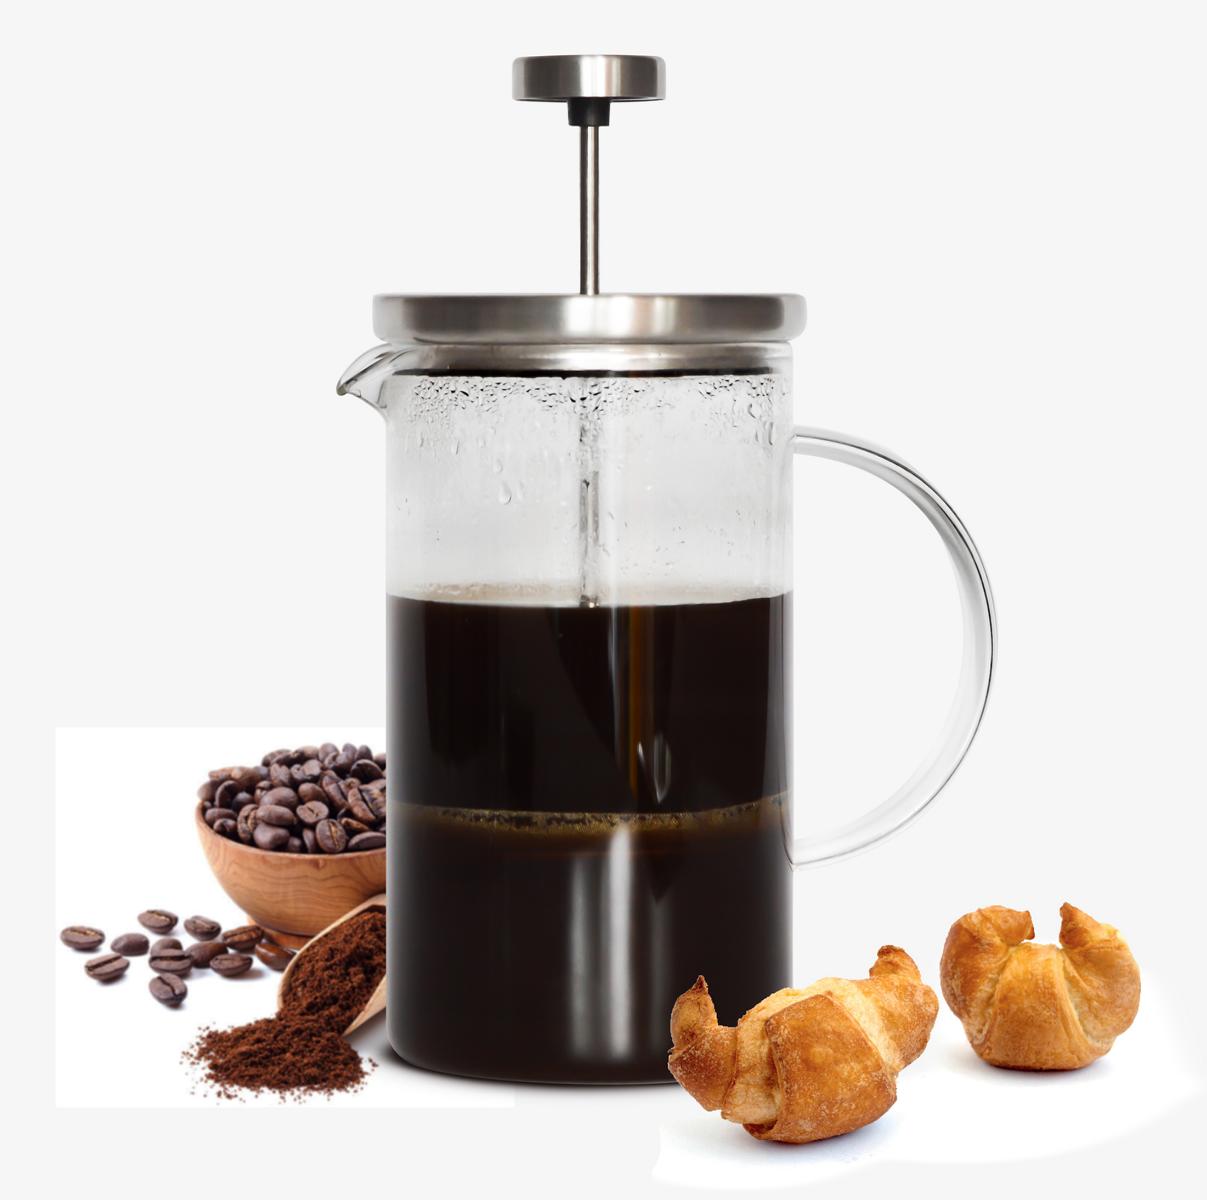 Tea coffee maker French press system made of stainless steel coffee press press pot